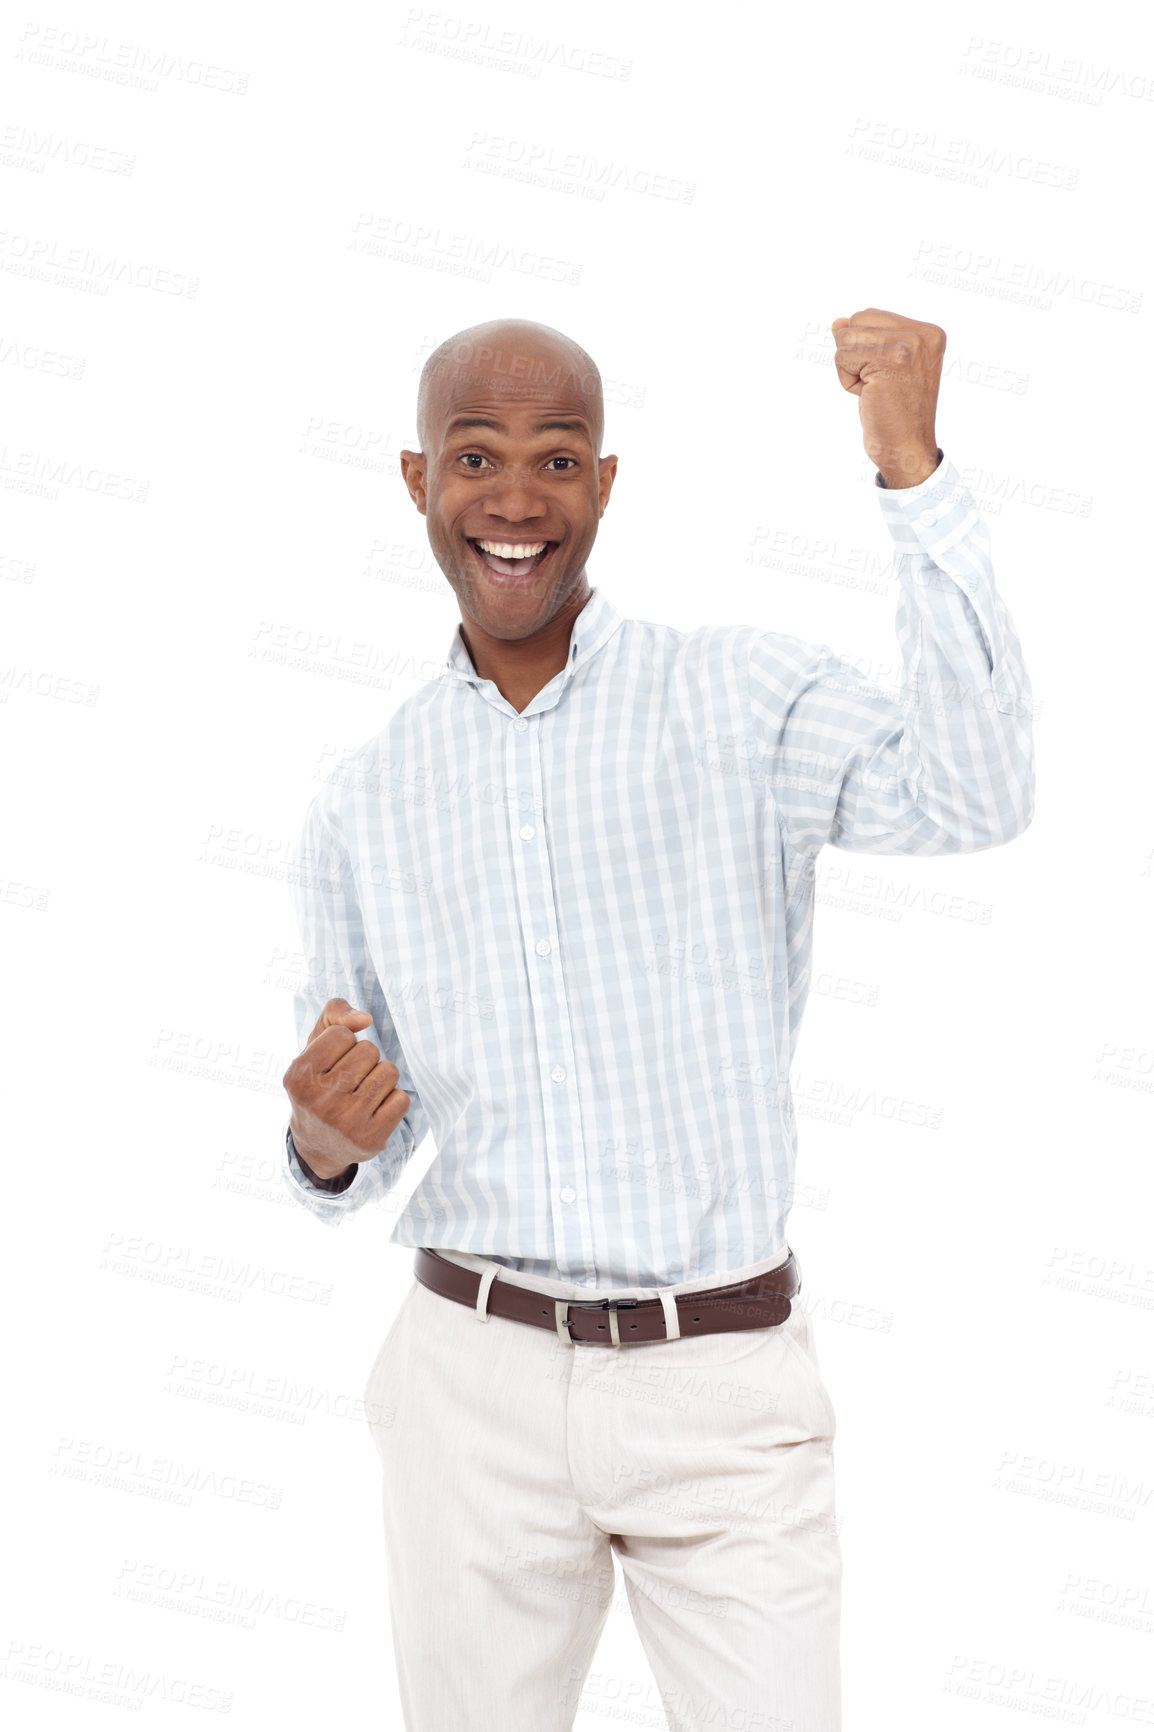 Buy stock photo Studio portrait of an excited young man raising his arms up in the air in celebration while smiling at the camera